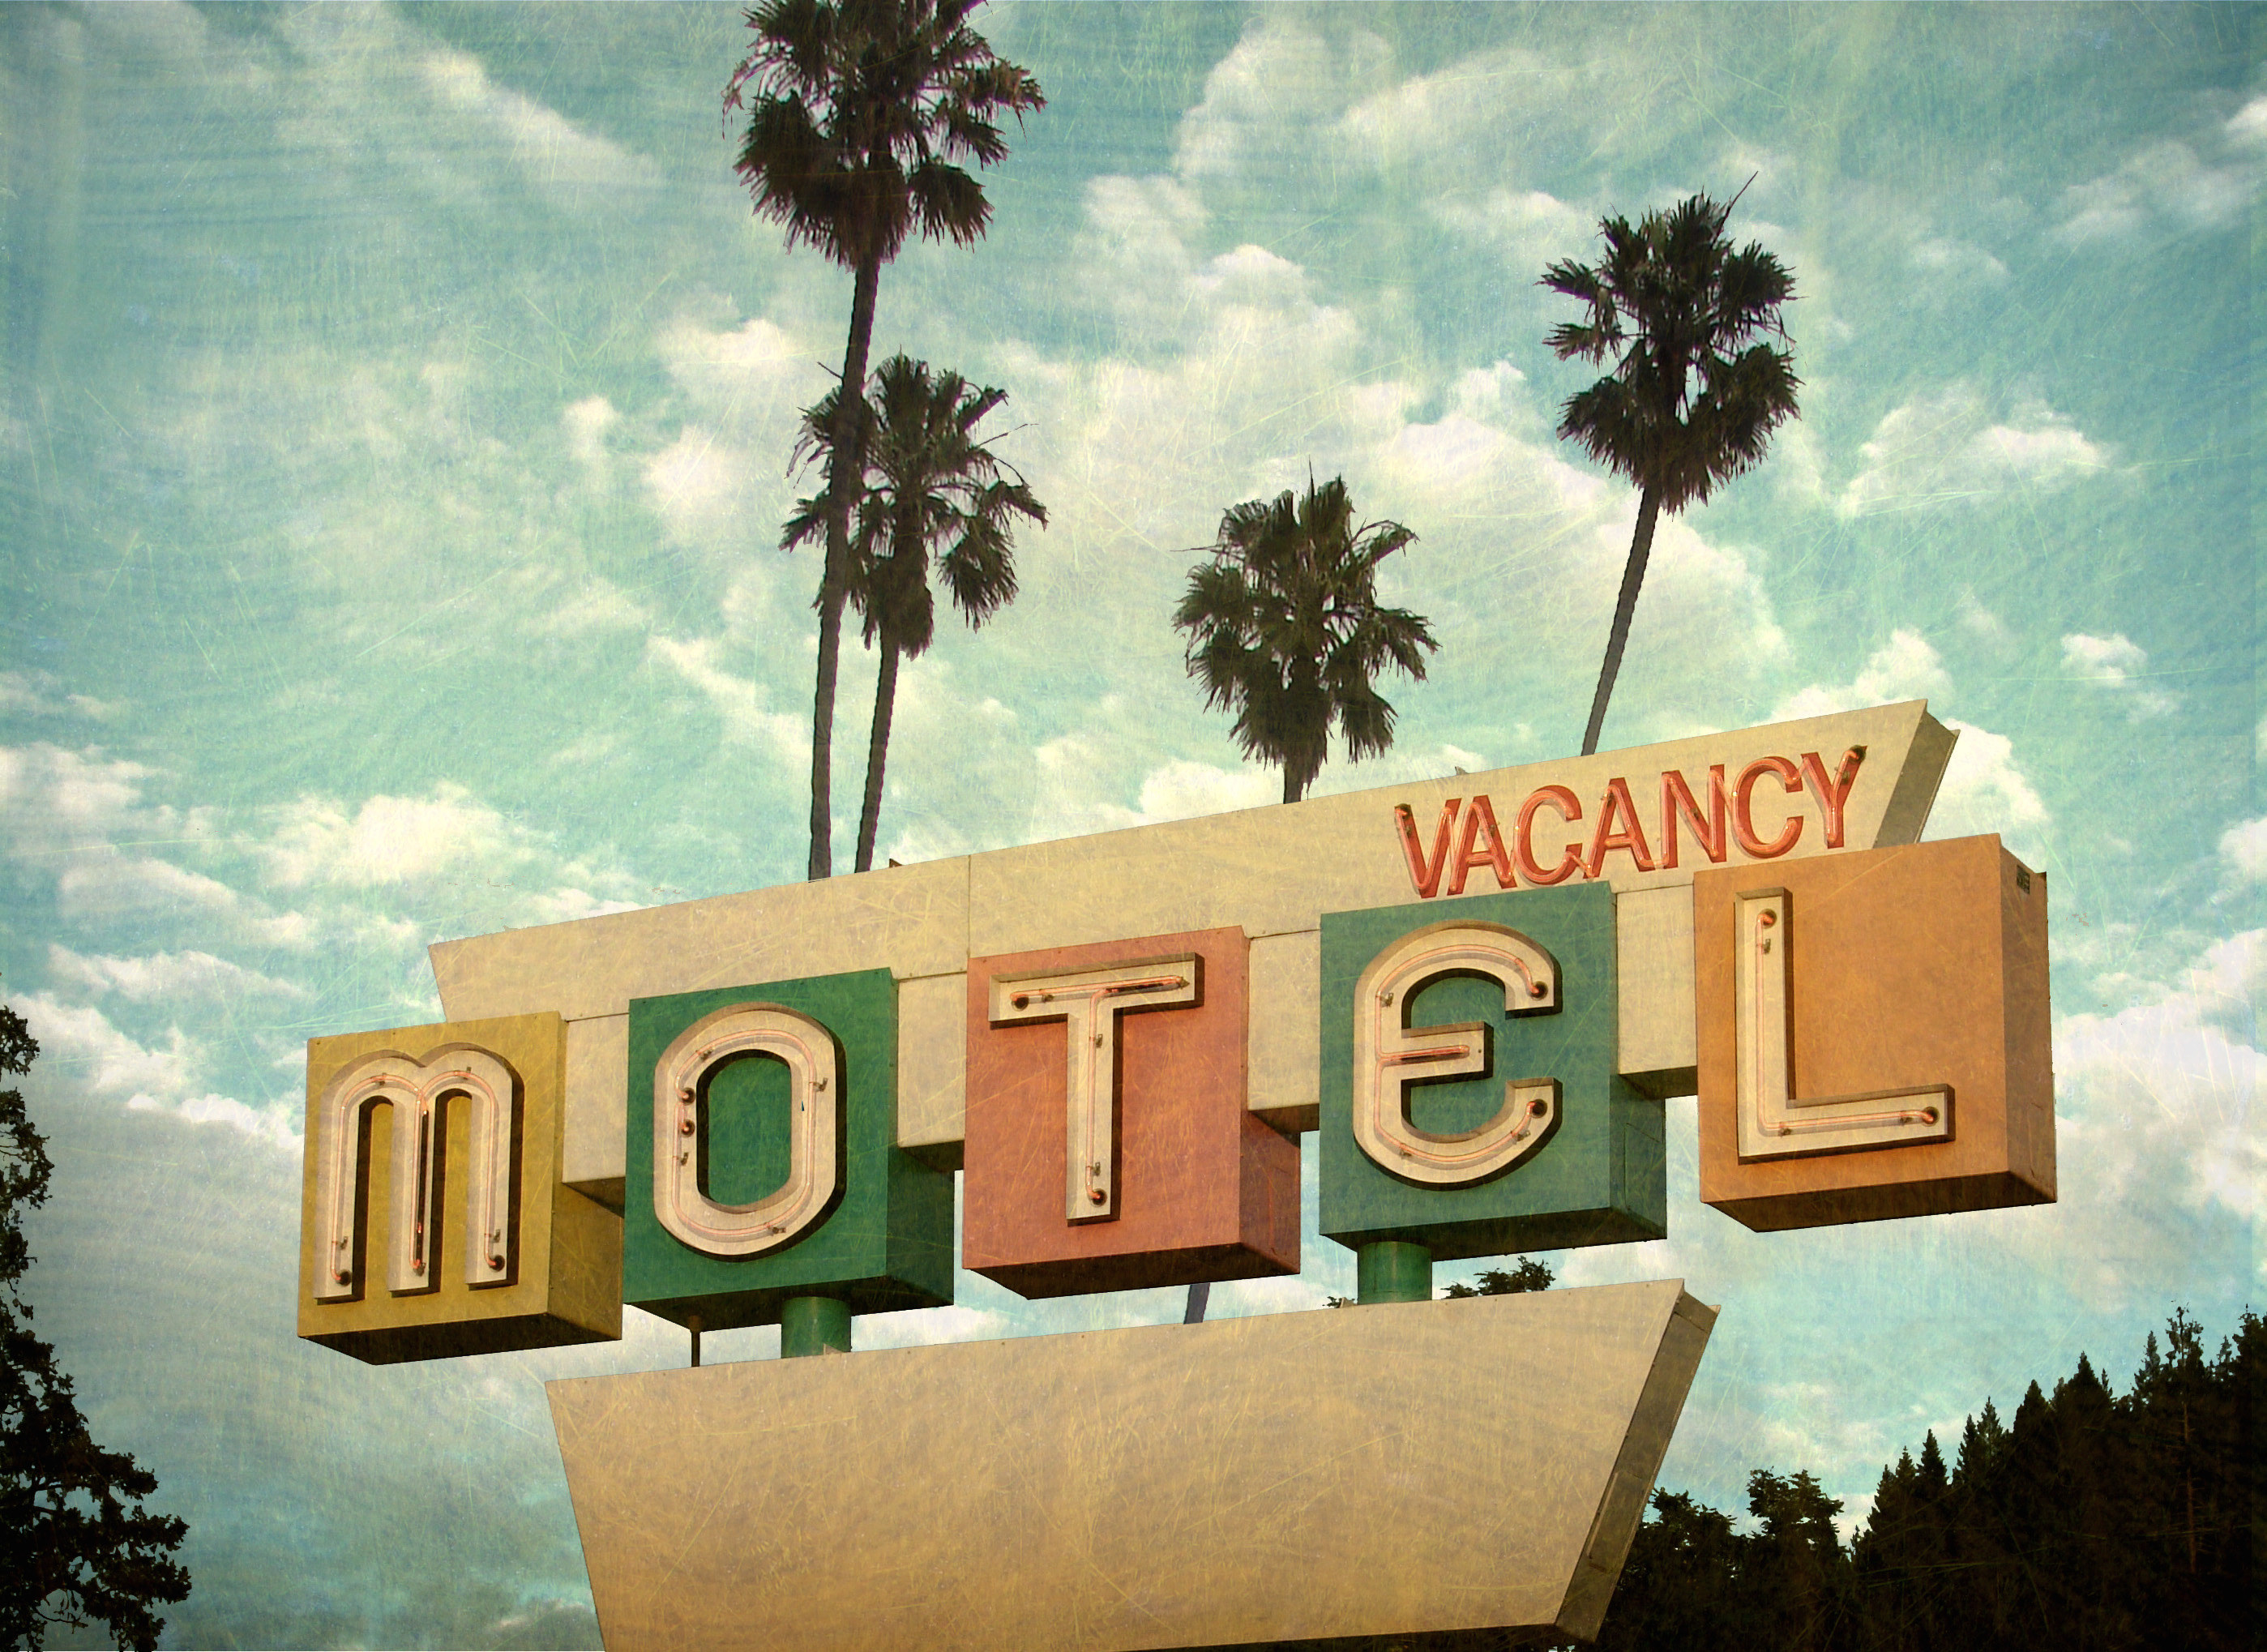 An aged and worn neon motel sign with palm trees